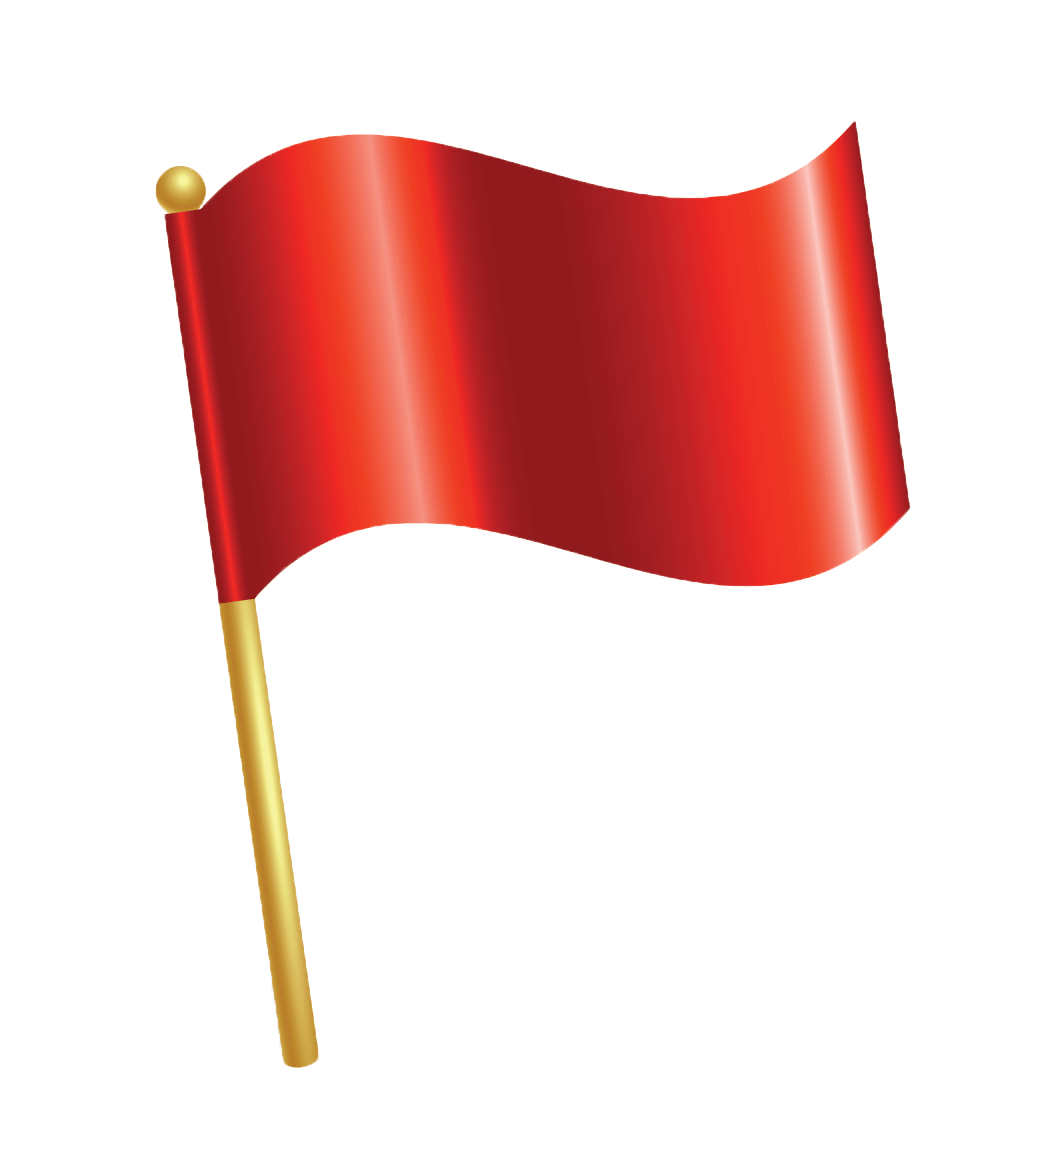 ... Red flag animated clipart ...